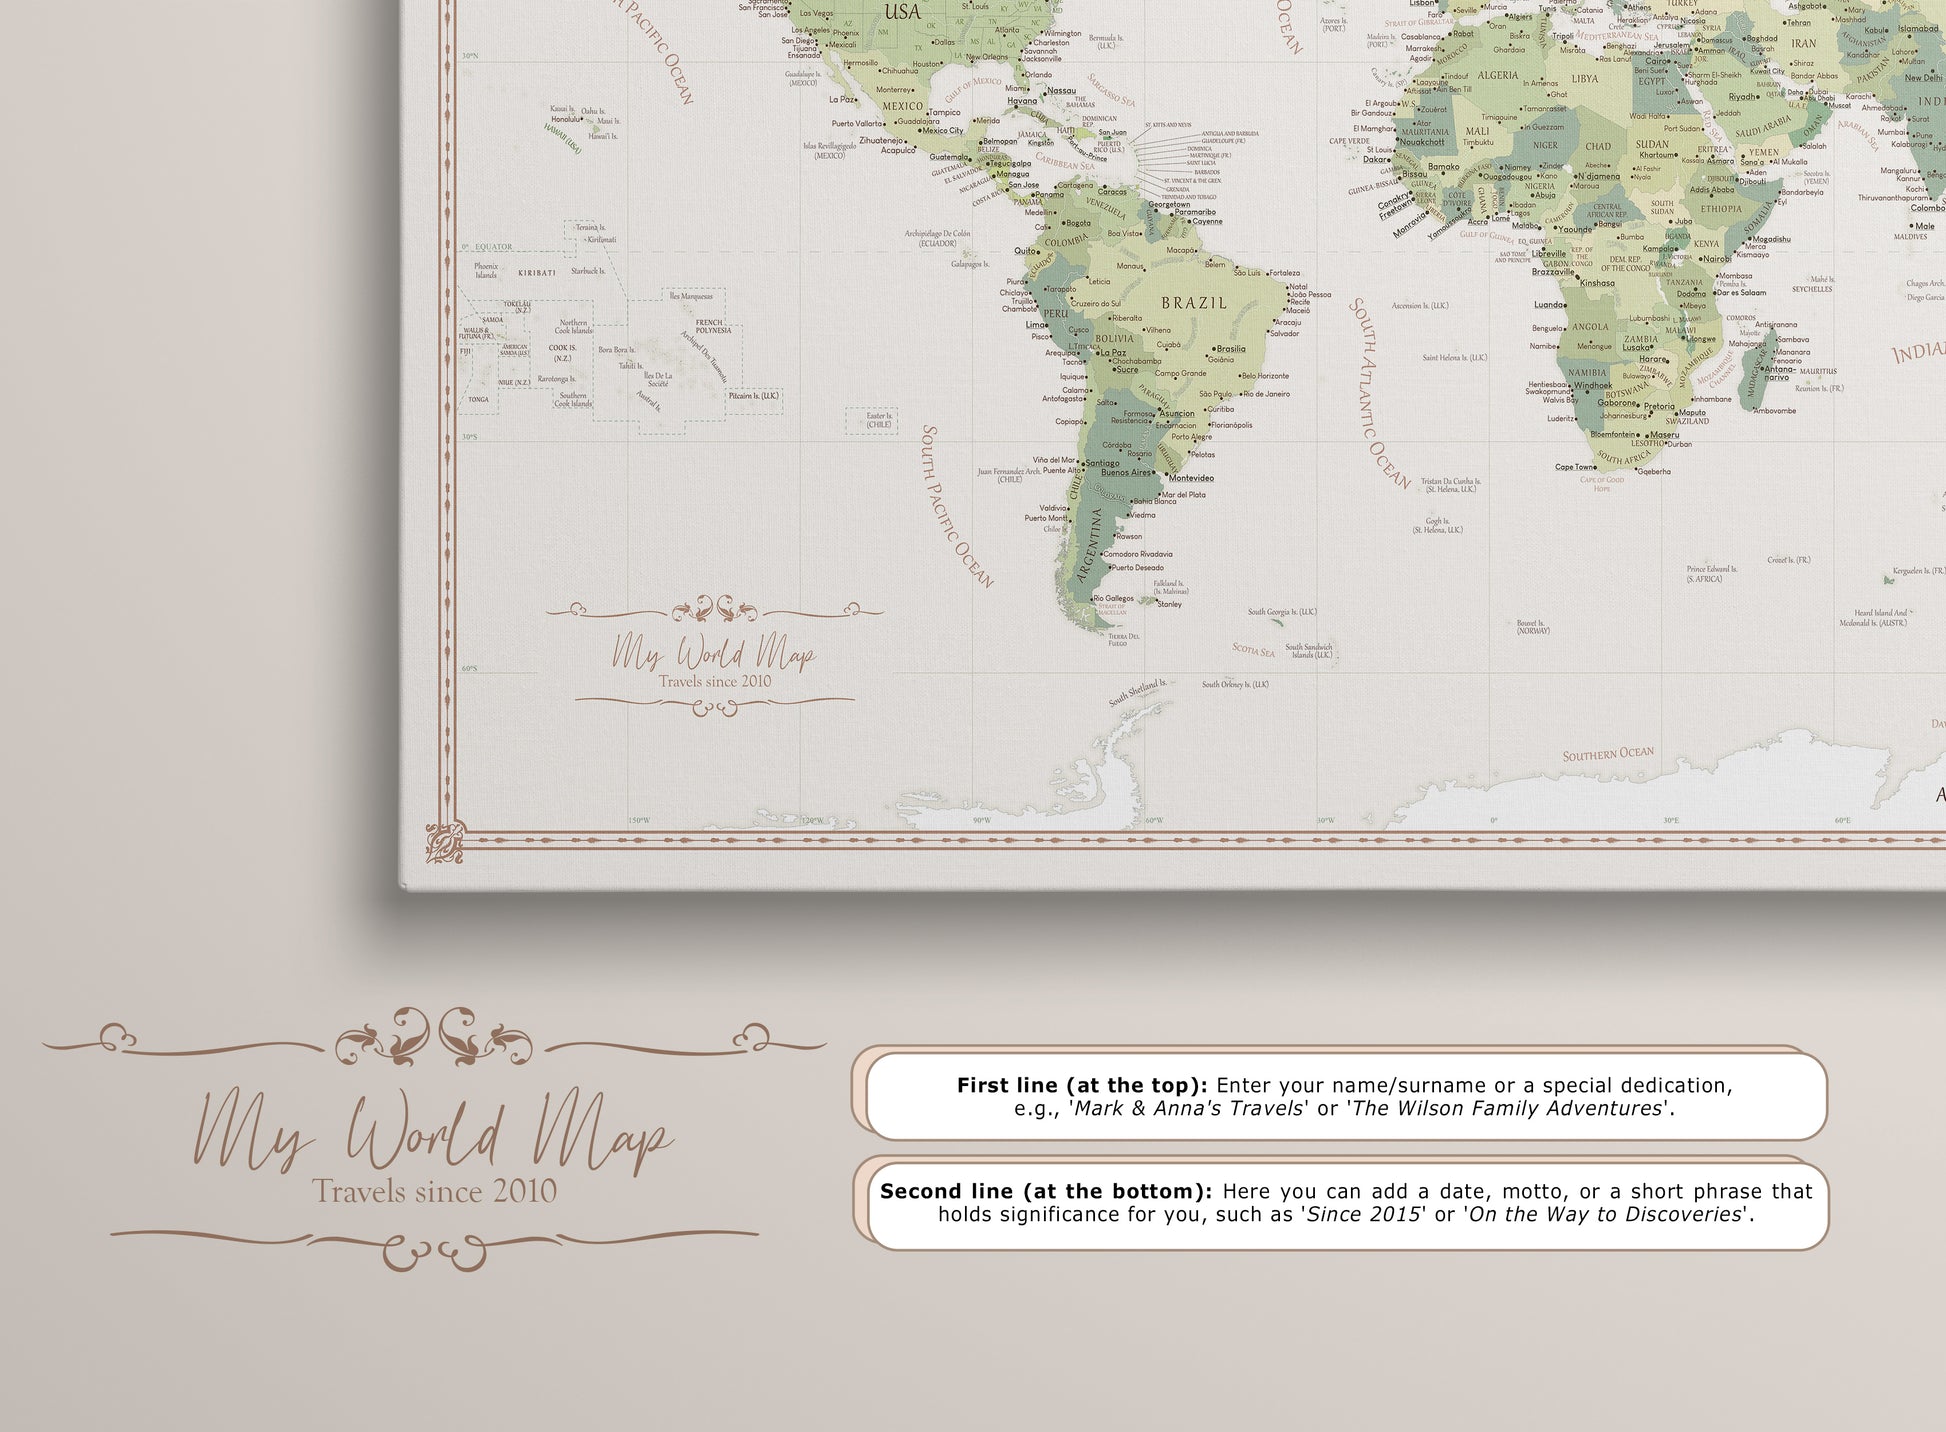 Personalizable world map pinboard with example text showcasing travel memories.